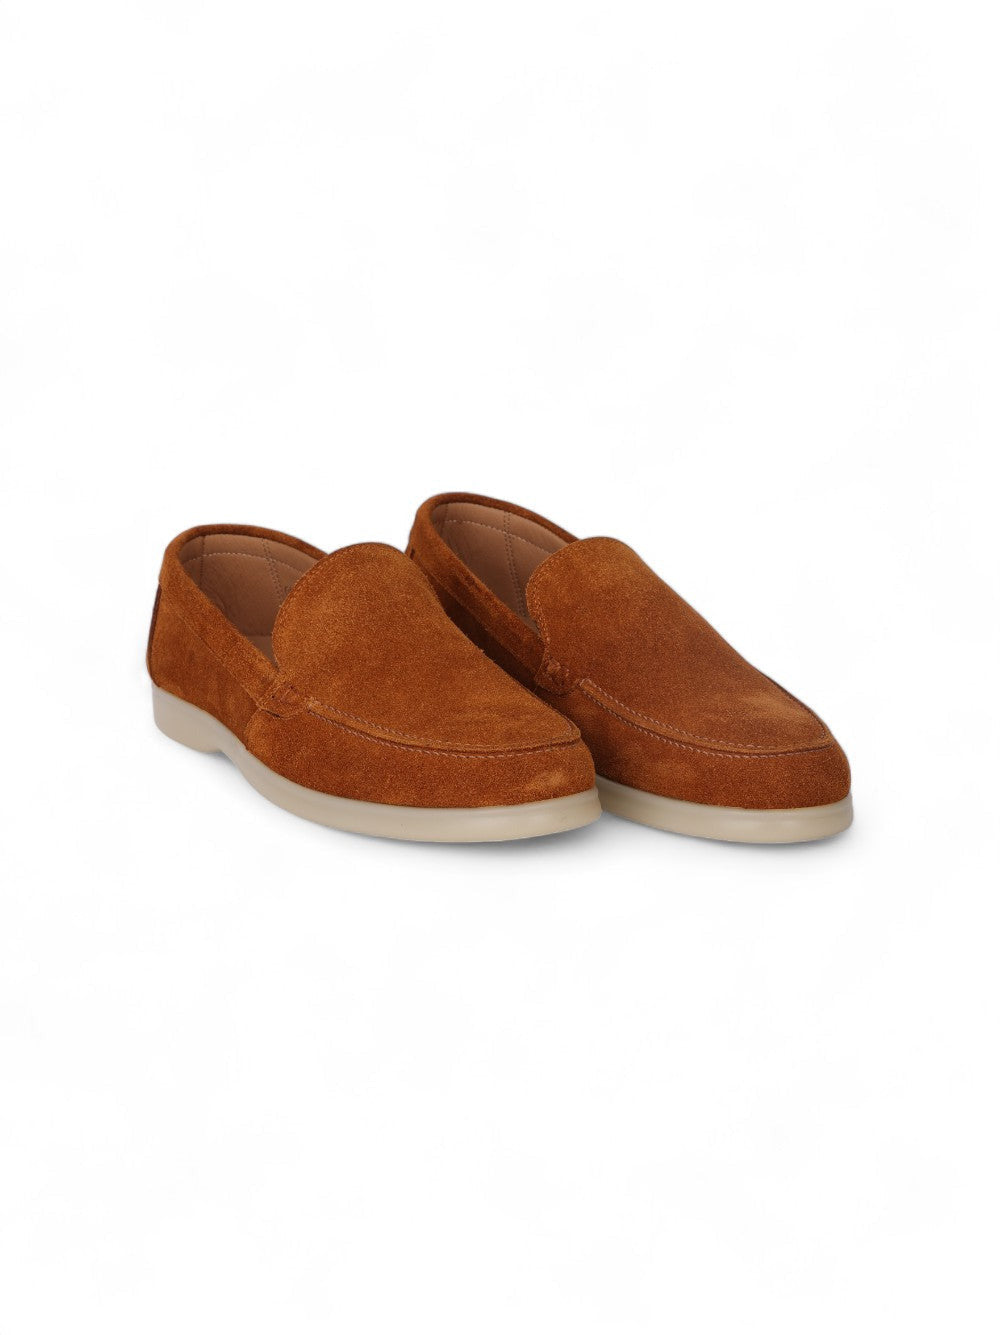 Flat Low Moccasin Casual Shoes